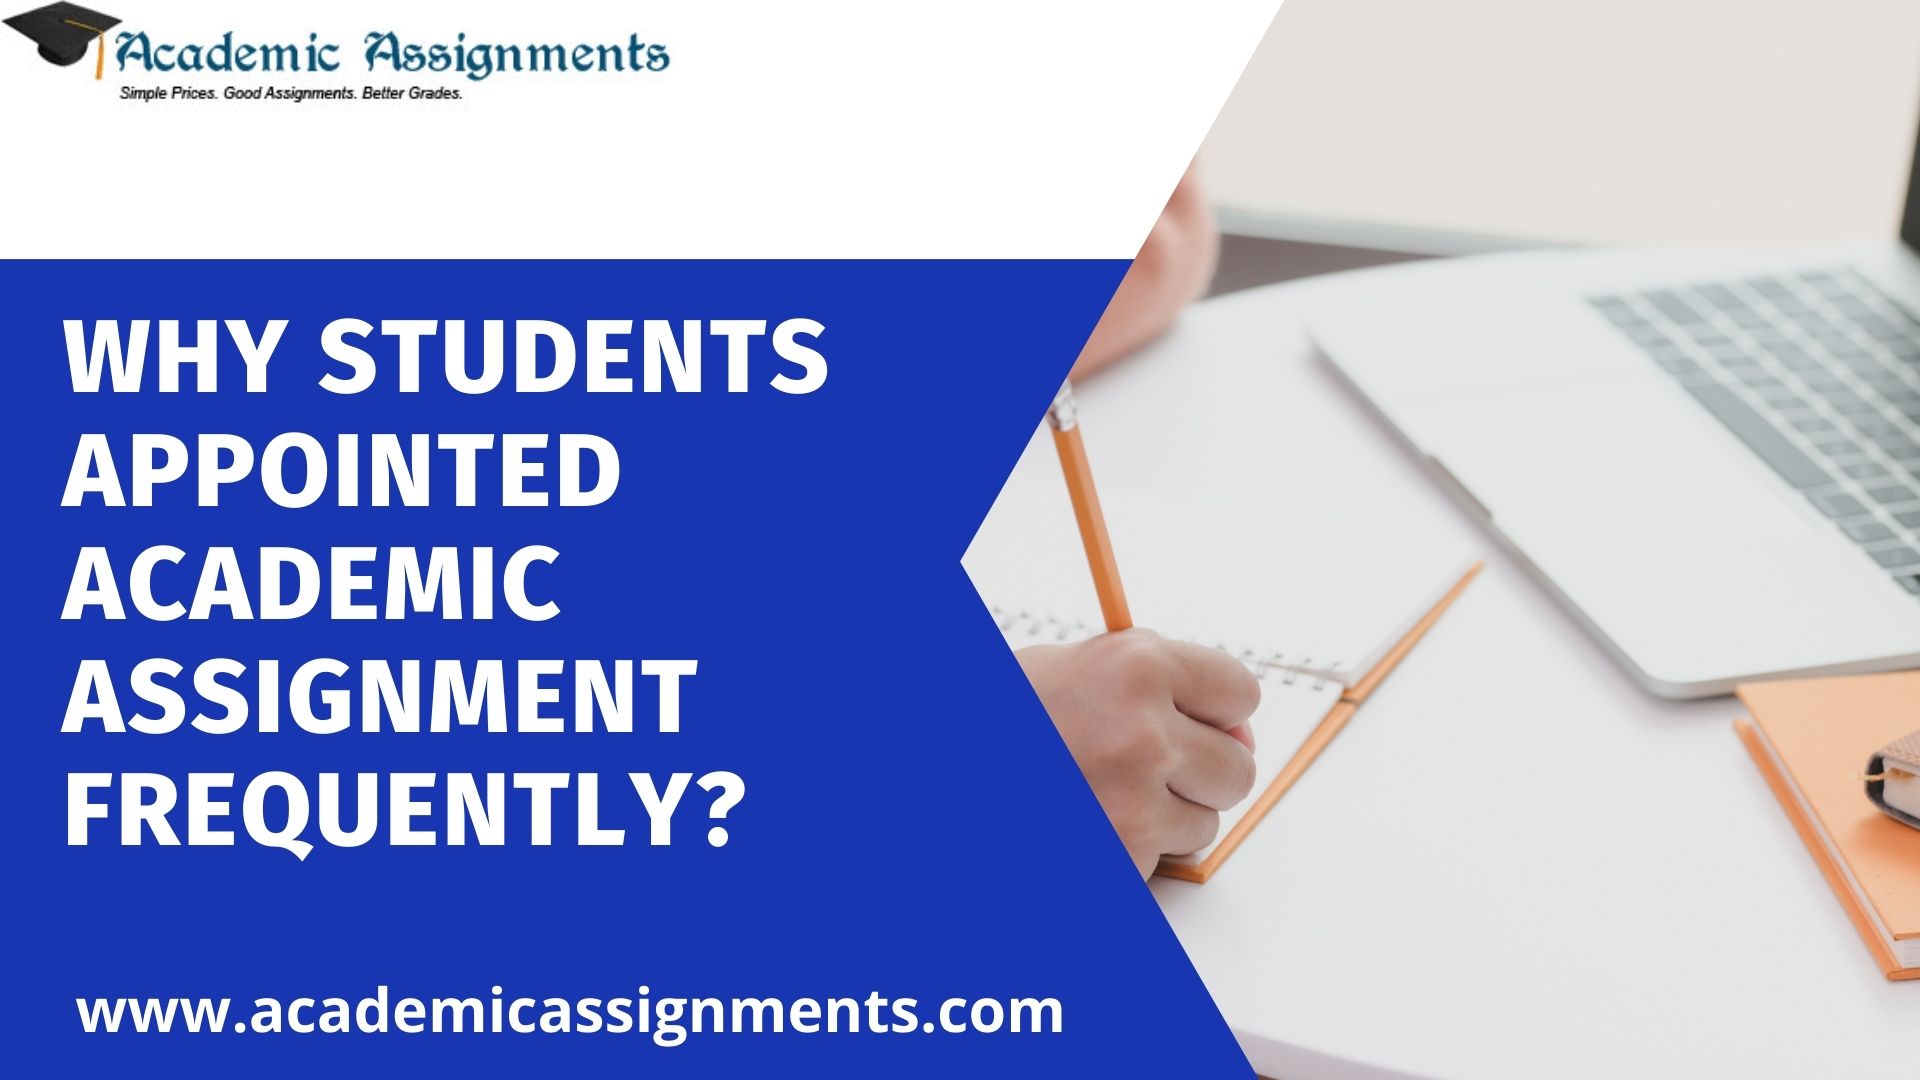 Why Students Appointed Academic Assignment Frequently